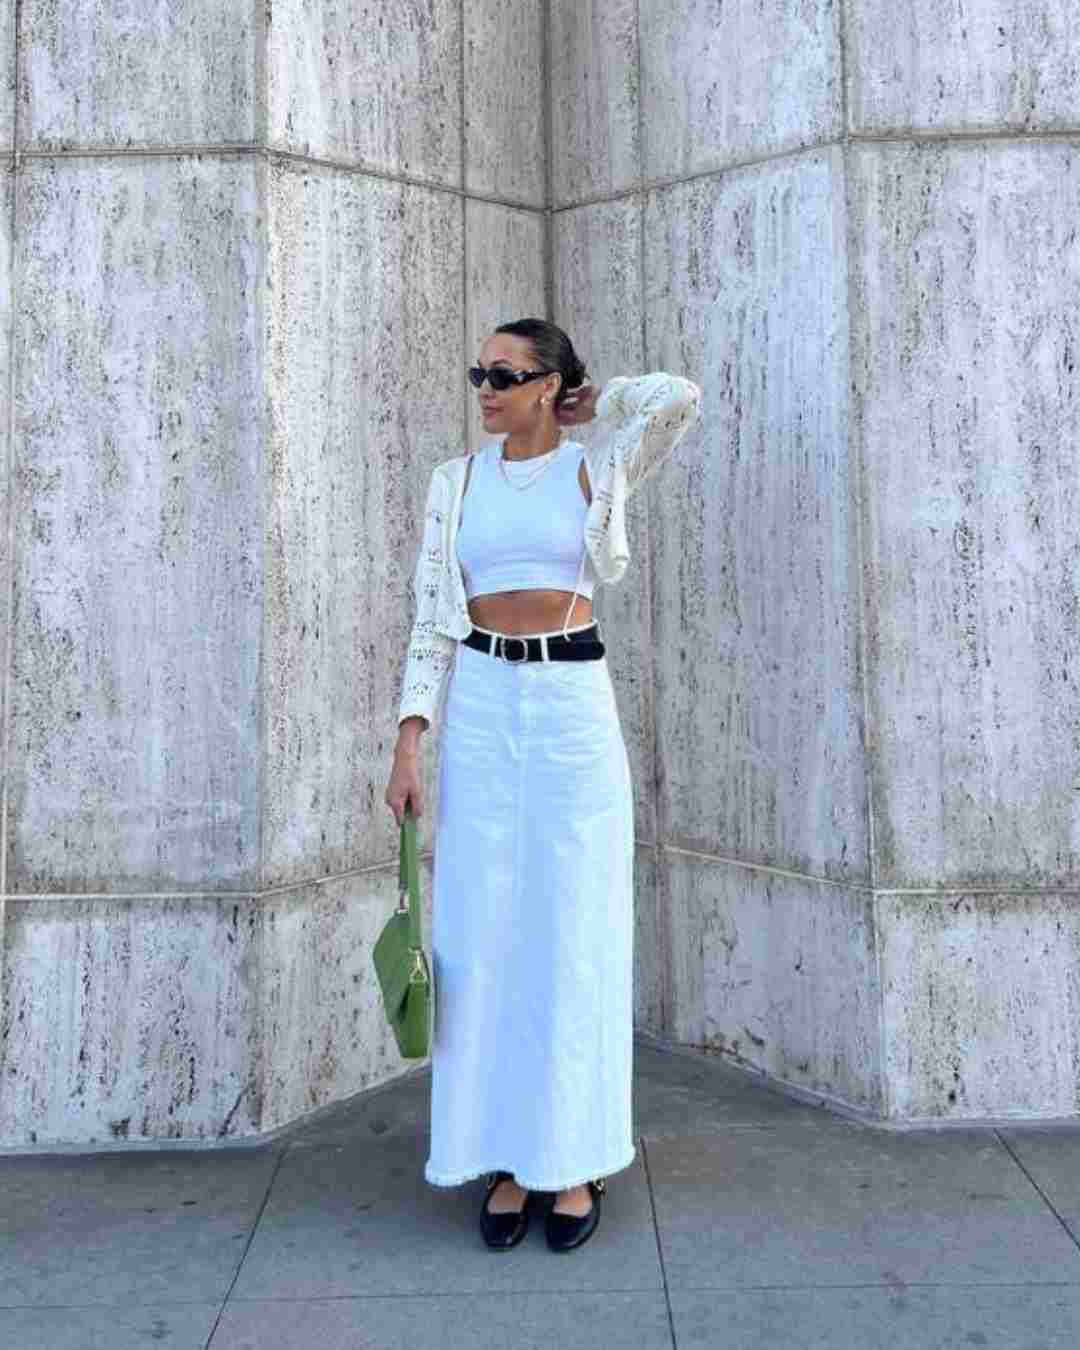 Women wearing a white maxi skirt; cropped whit t-shirt and cardigan; wide black belt, green handbag and black Mary Jane shoes